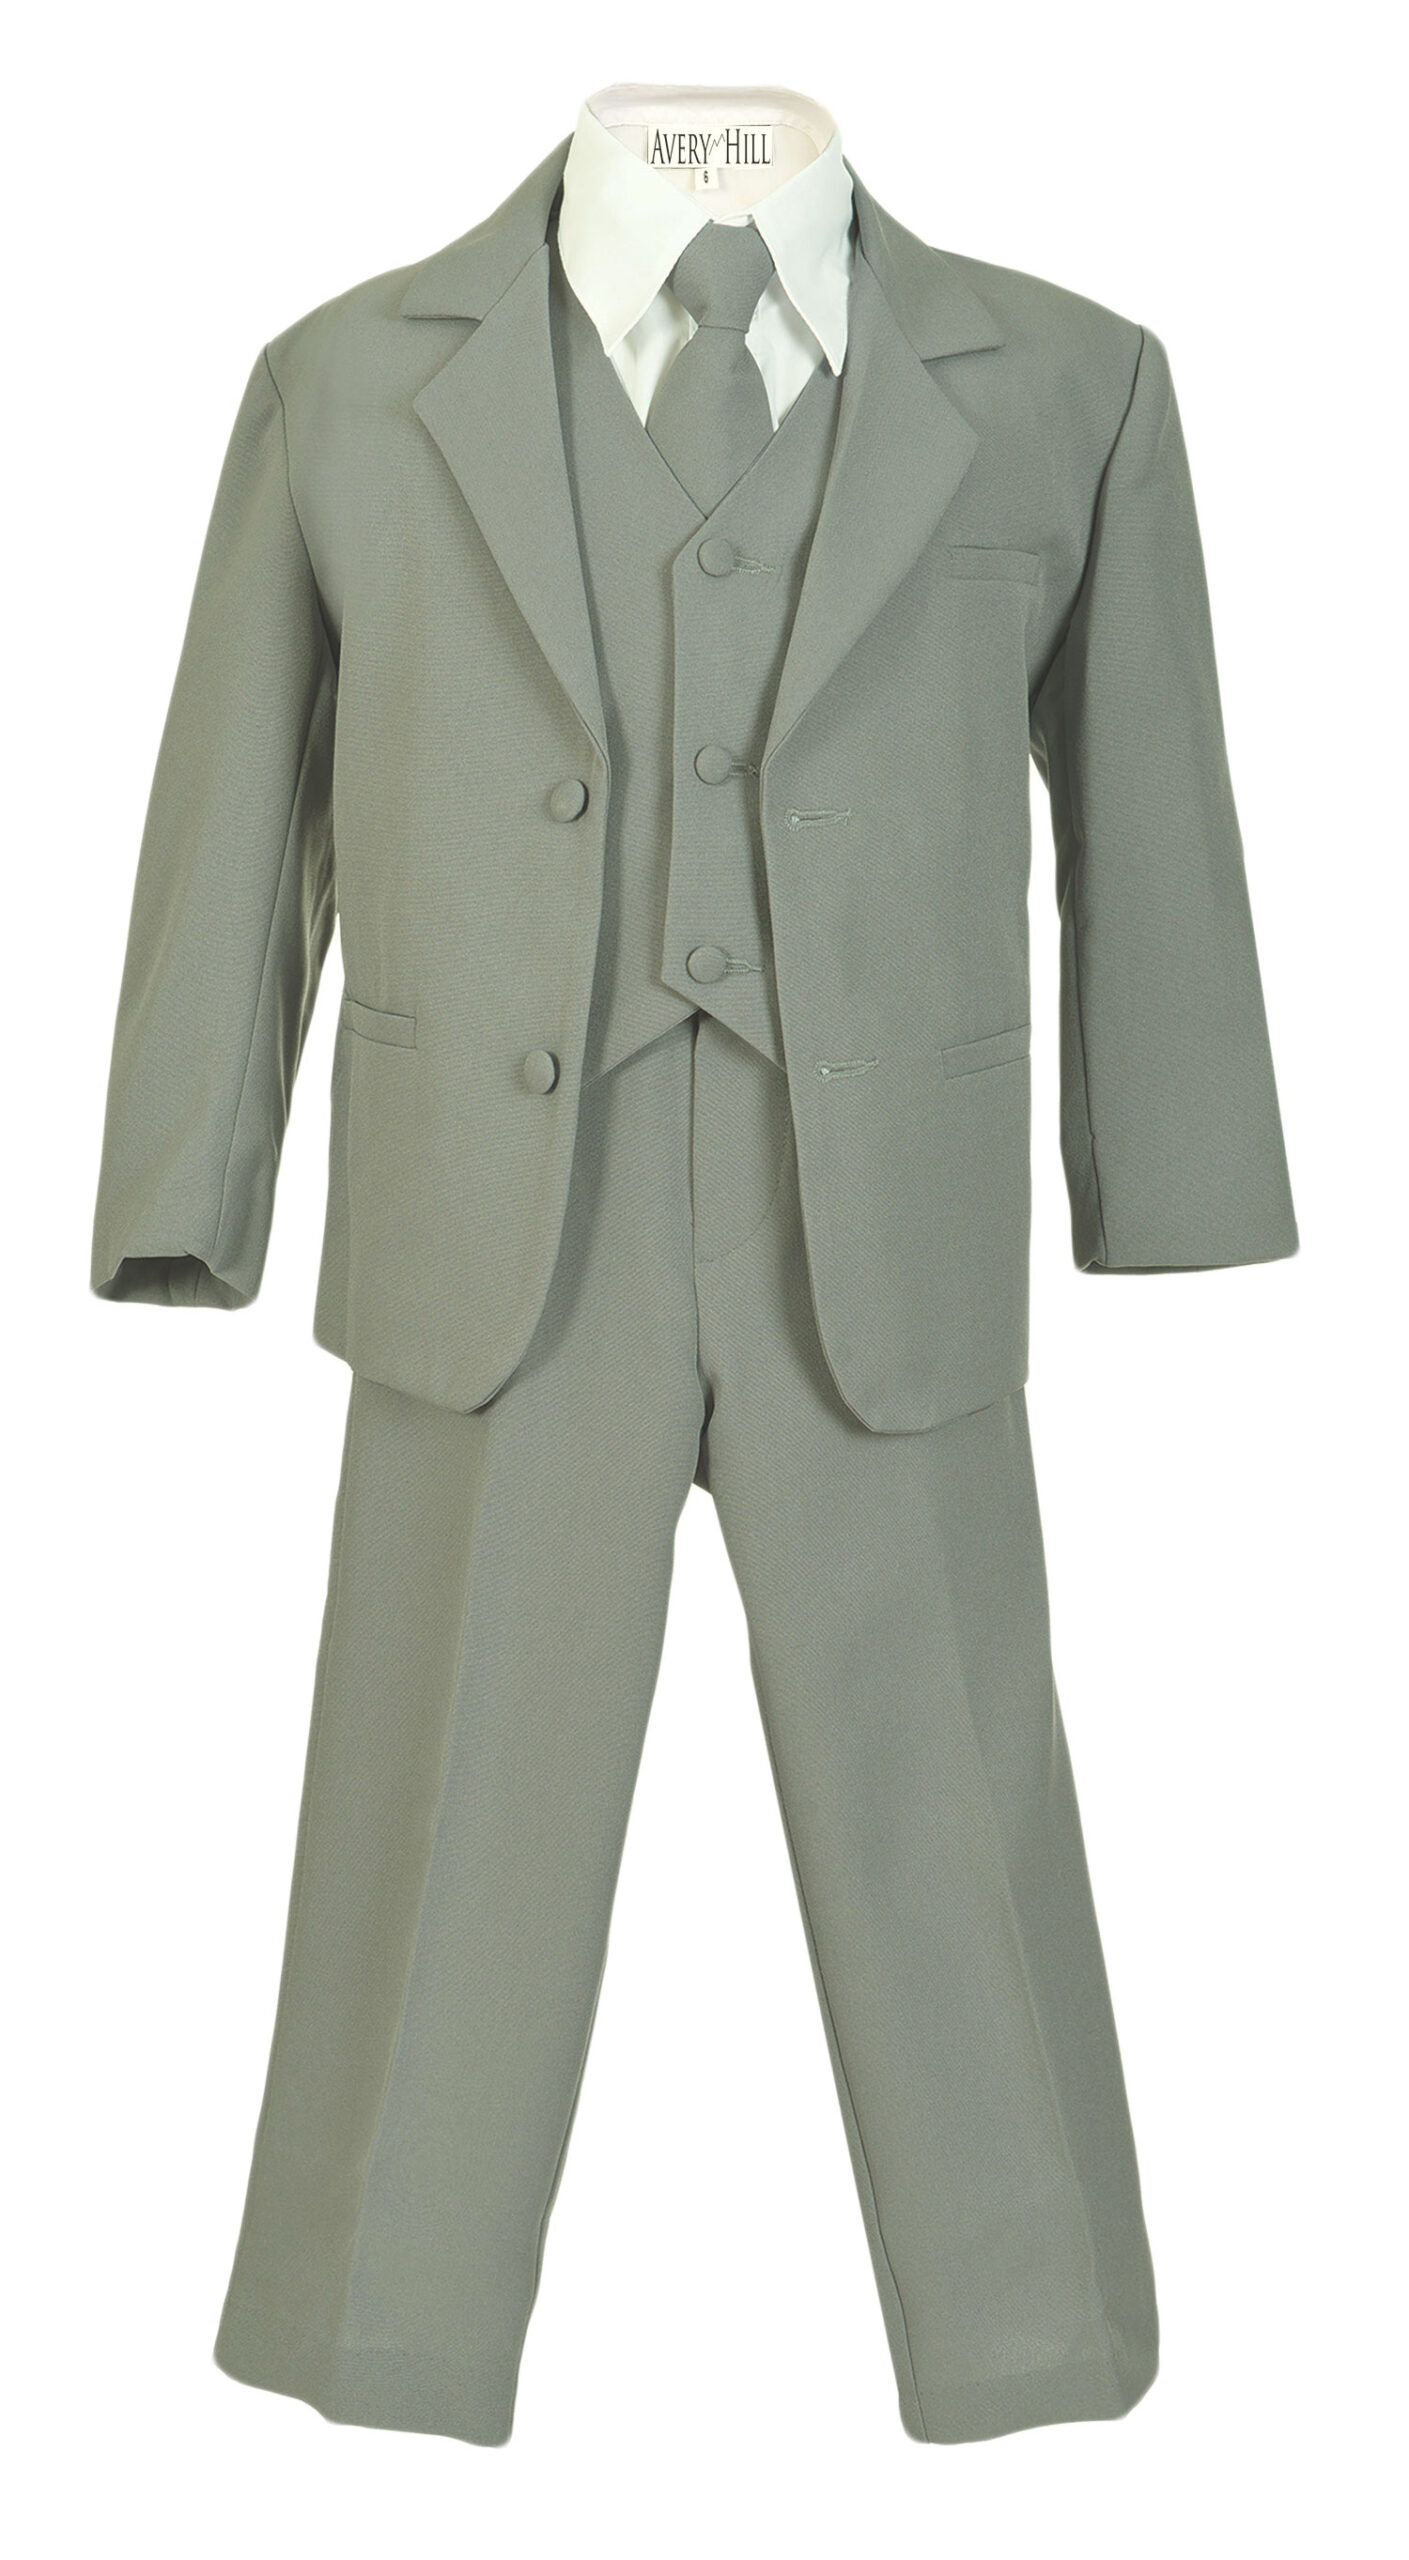 Avery Hill Boys Formal 5 Piece Suit with Shirt and Vest Silver White - 20